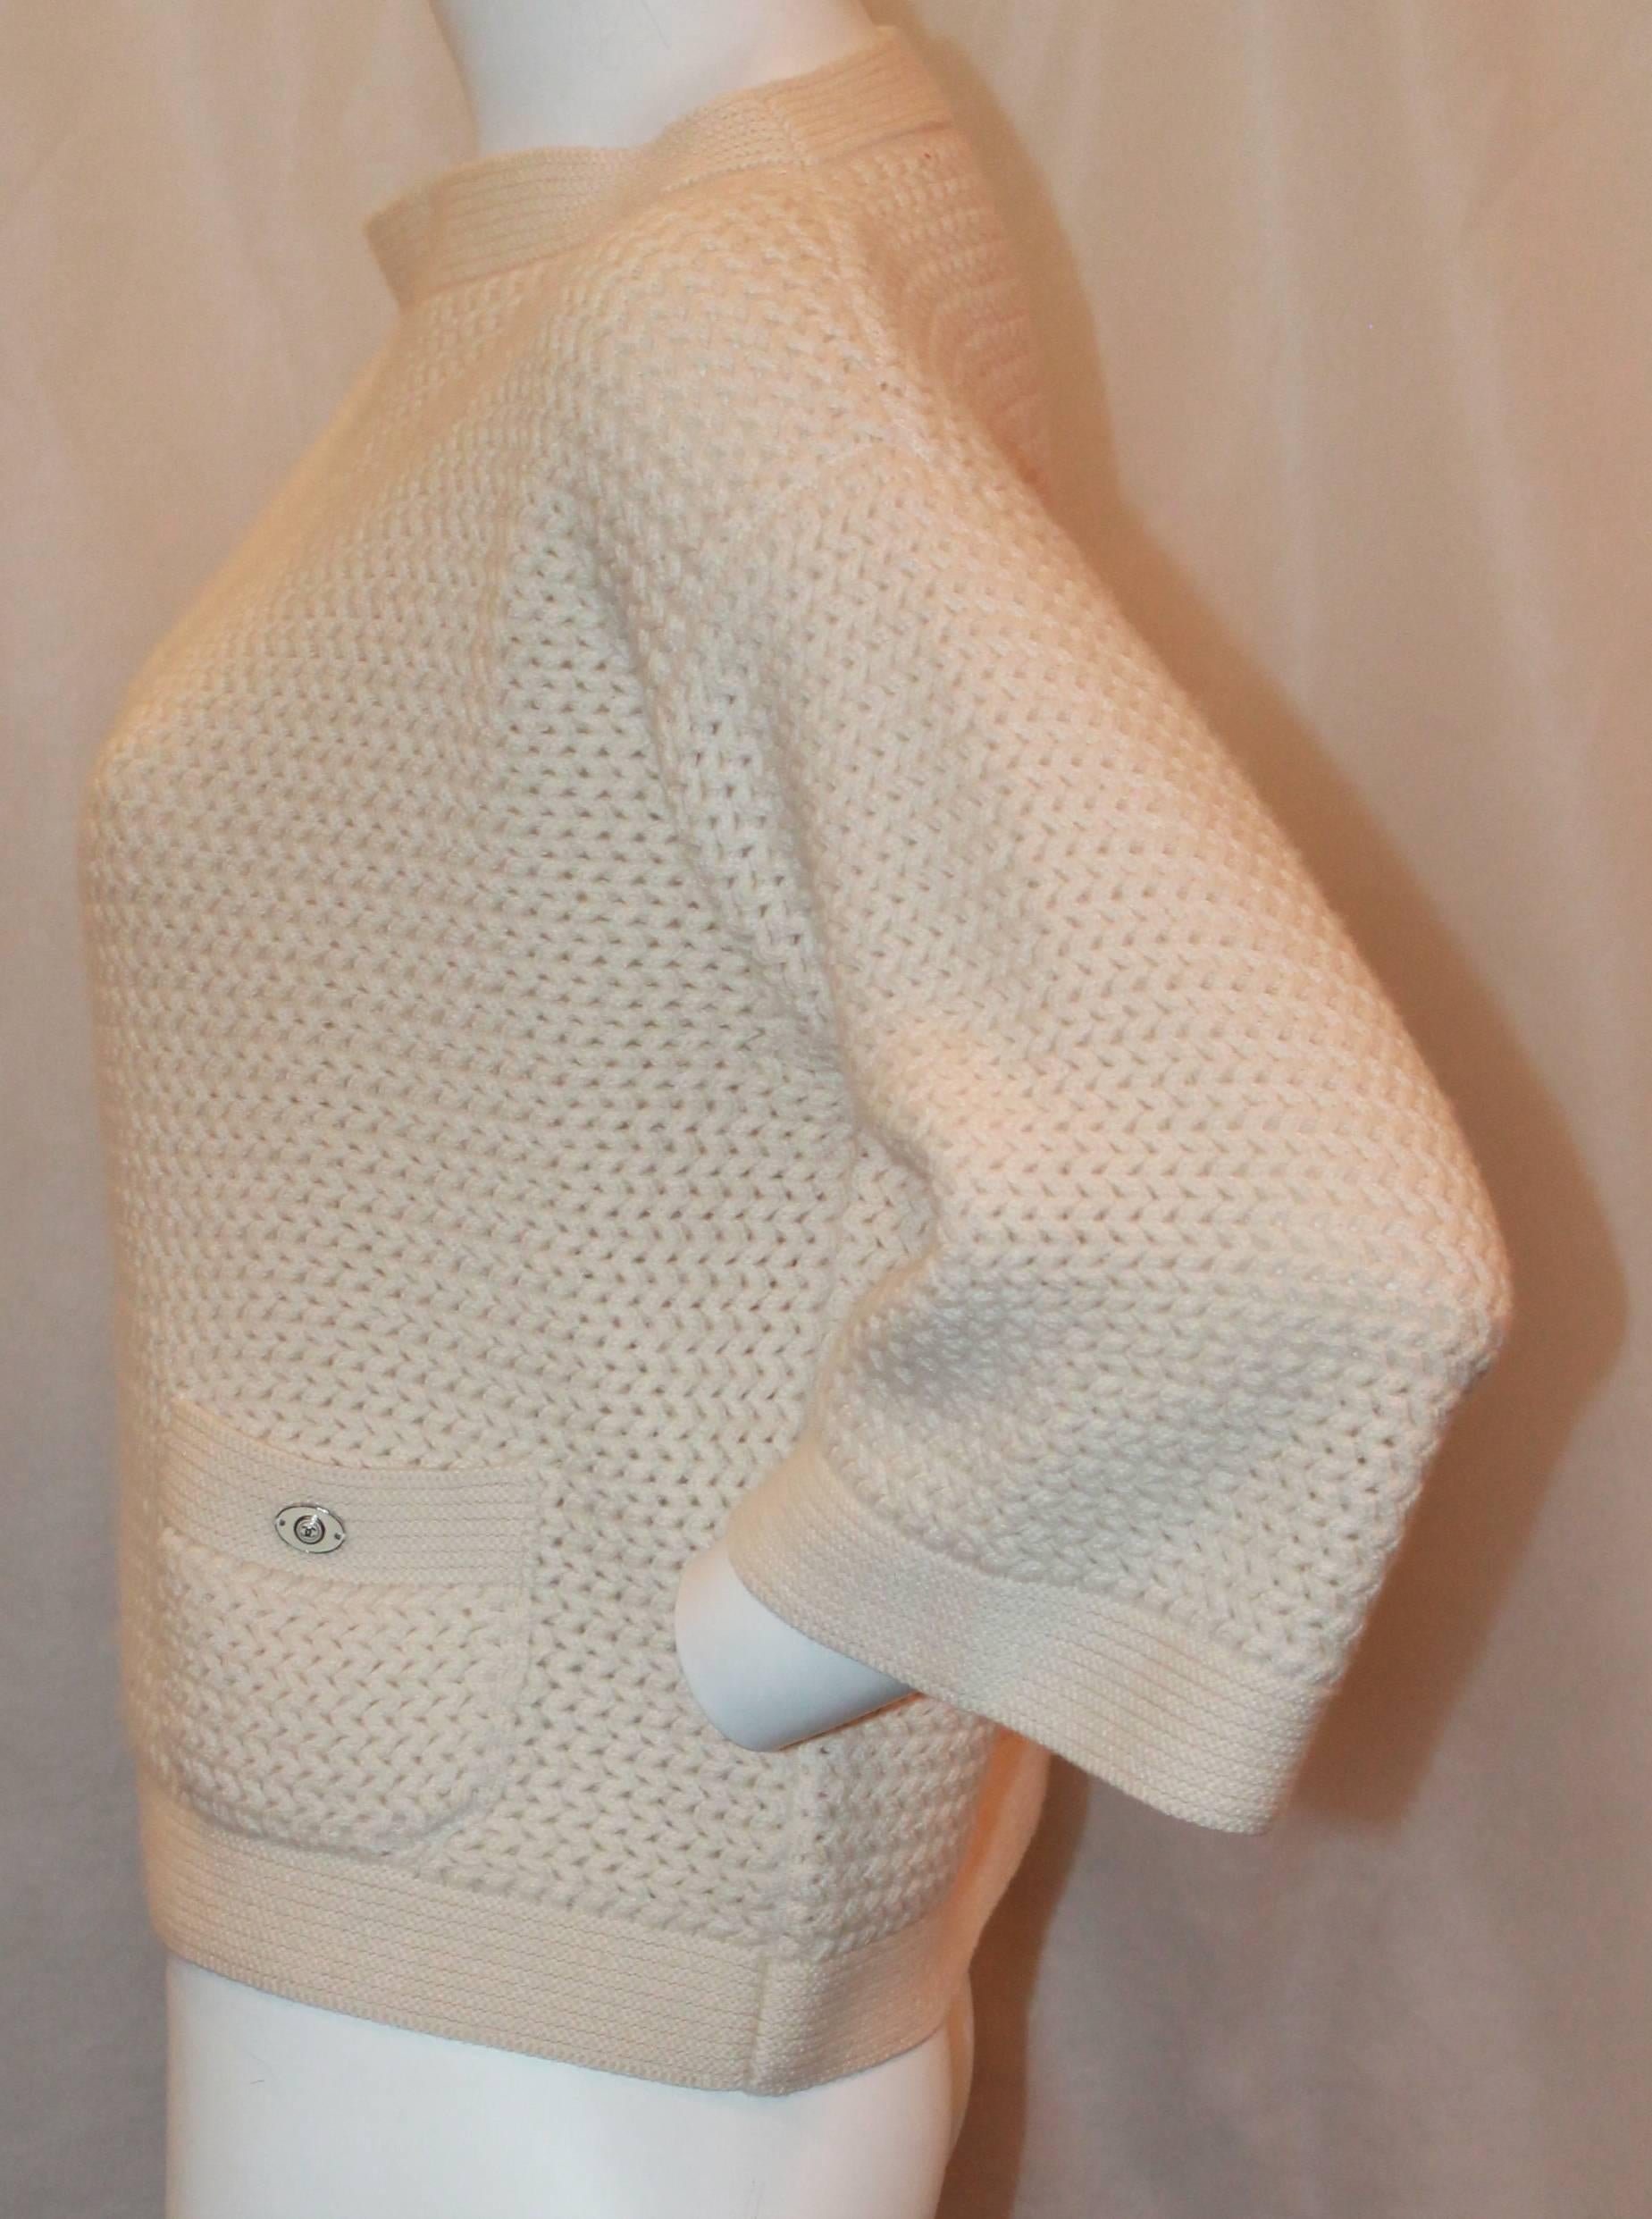 Chanel Ivory Cashmere Oversized Knitted Sweater Top - 42.  This simply beautiful sweater is in excellent condition.  It features two front pockets and an enamel Chanel logo on one of the pockets.  This sweater is absolutely gorgeous and incredibly